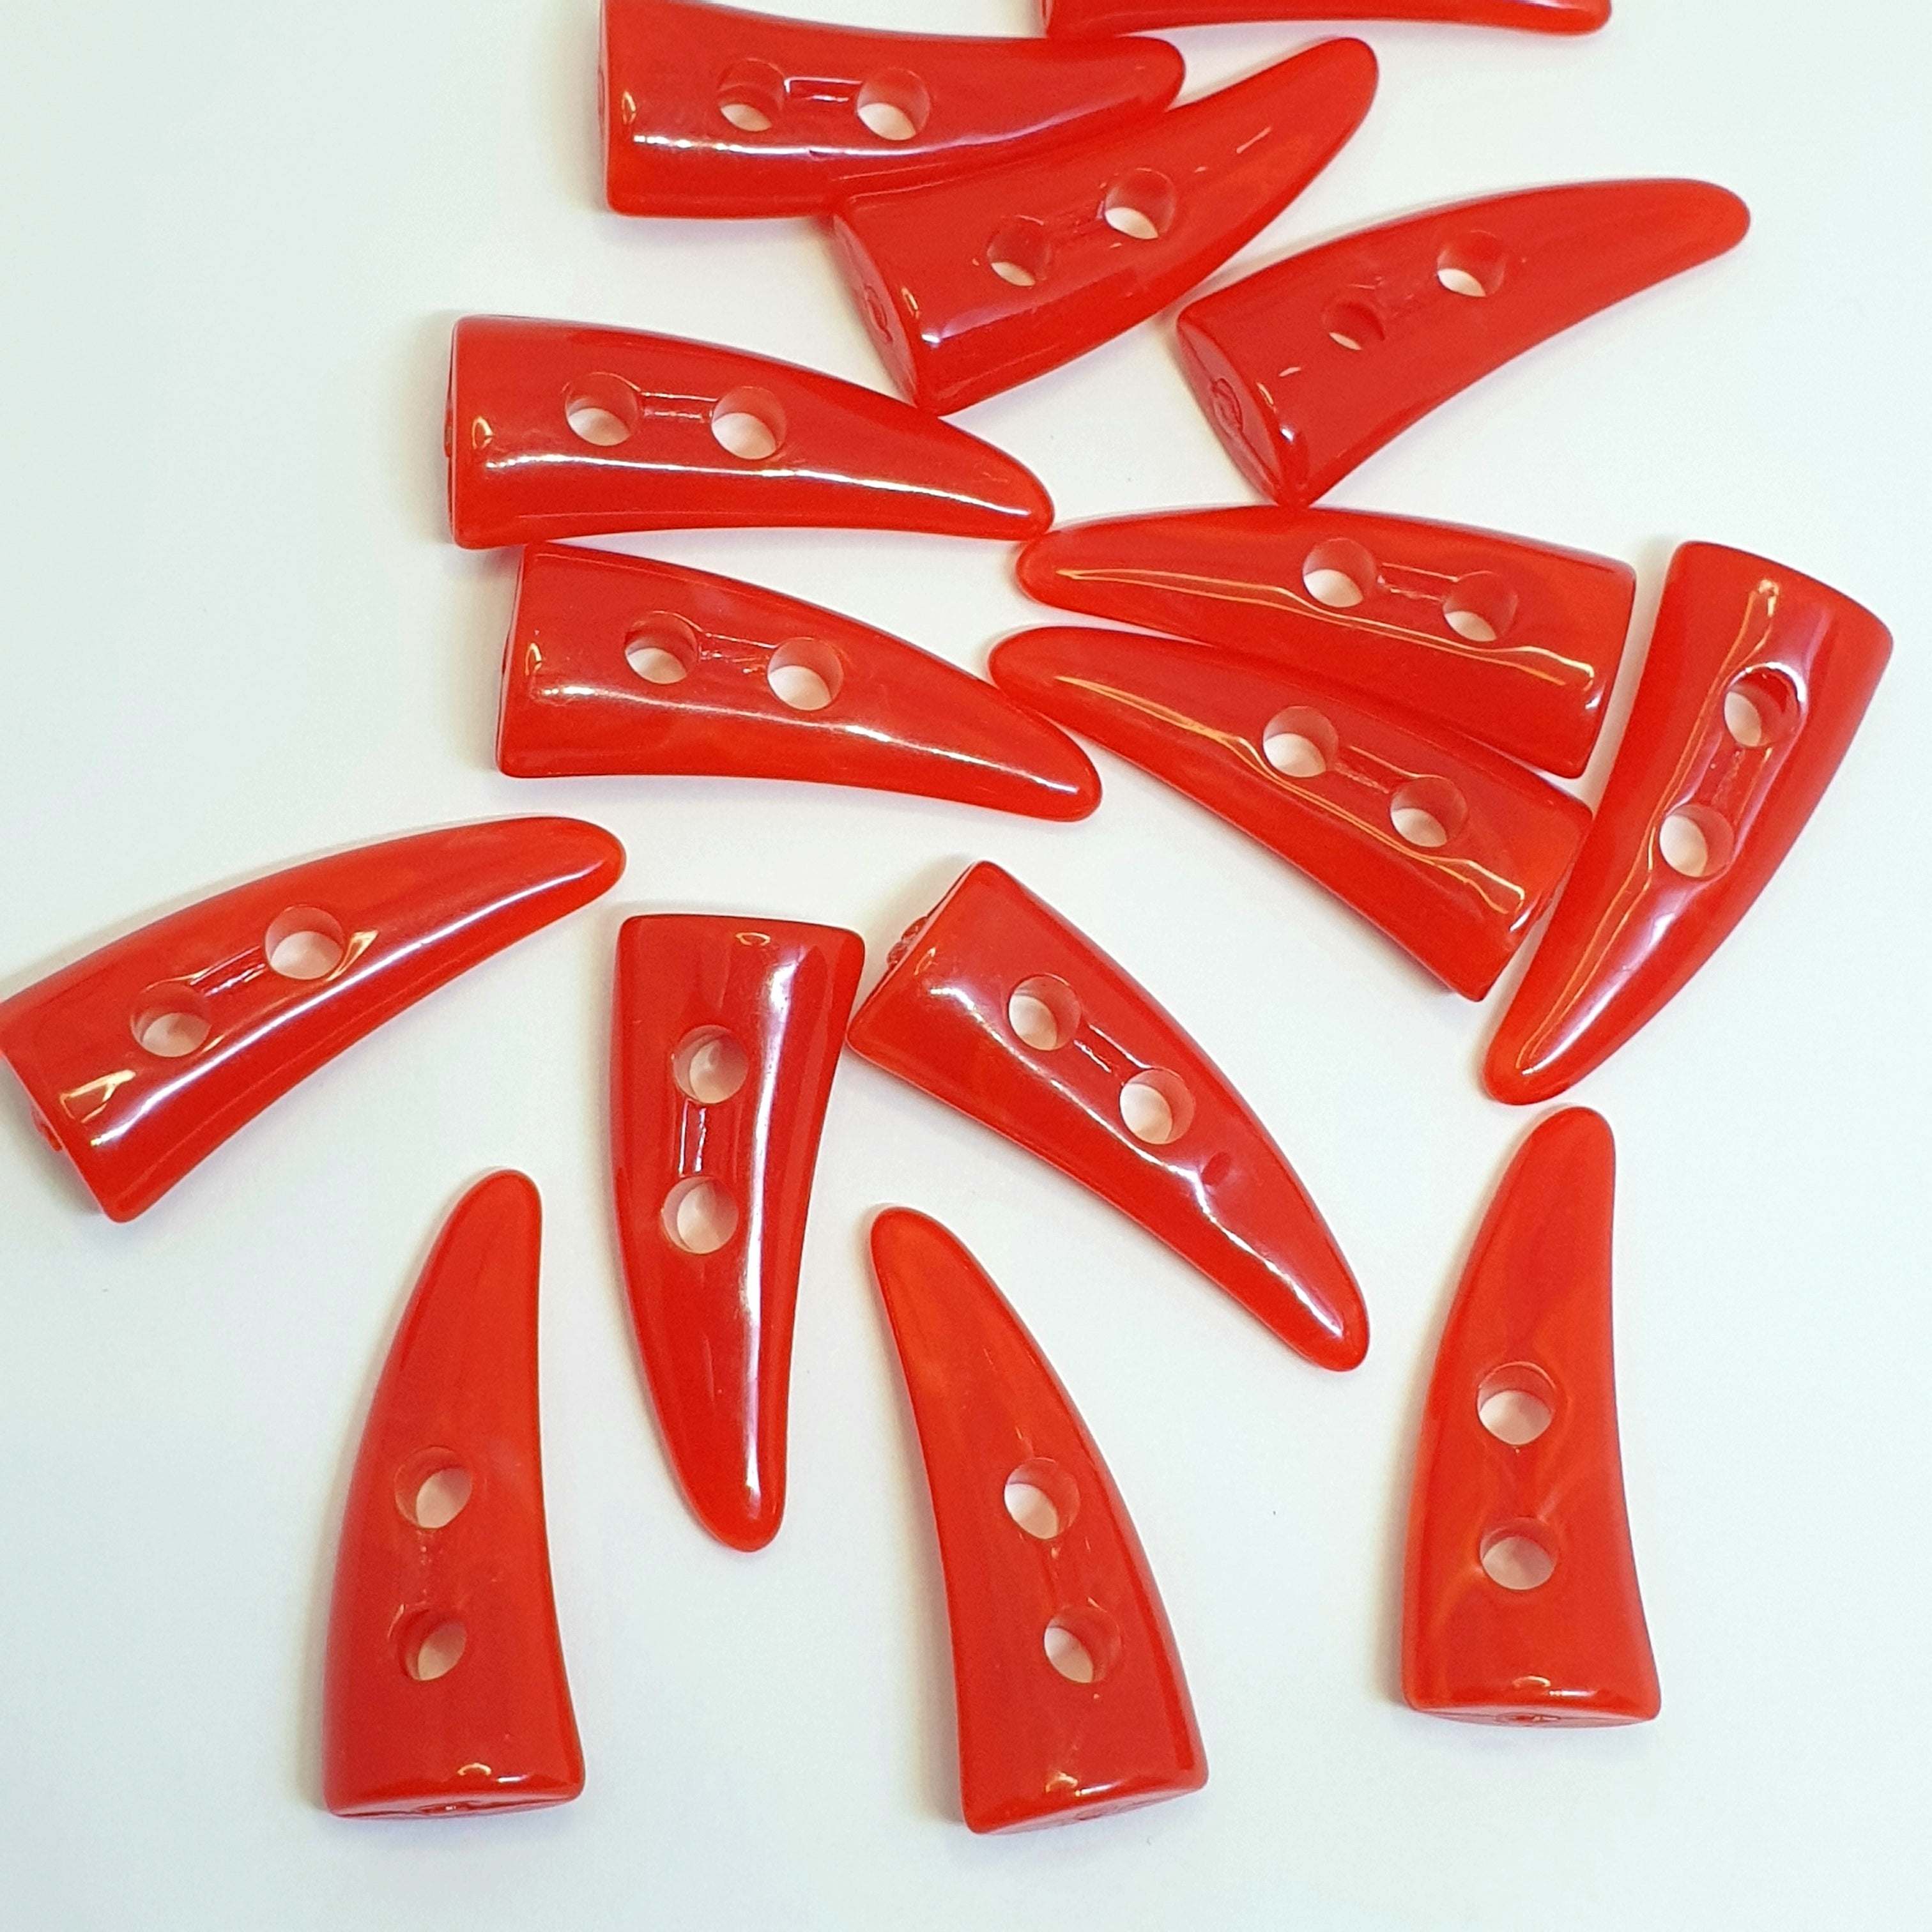 MajorCrafts 16pcs 30mm Red Horn/Tooth Shaped 2 Holes Sewing Toggle Acrylic Buttons